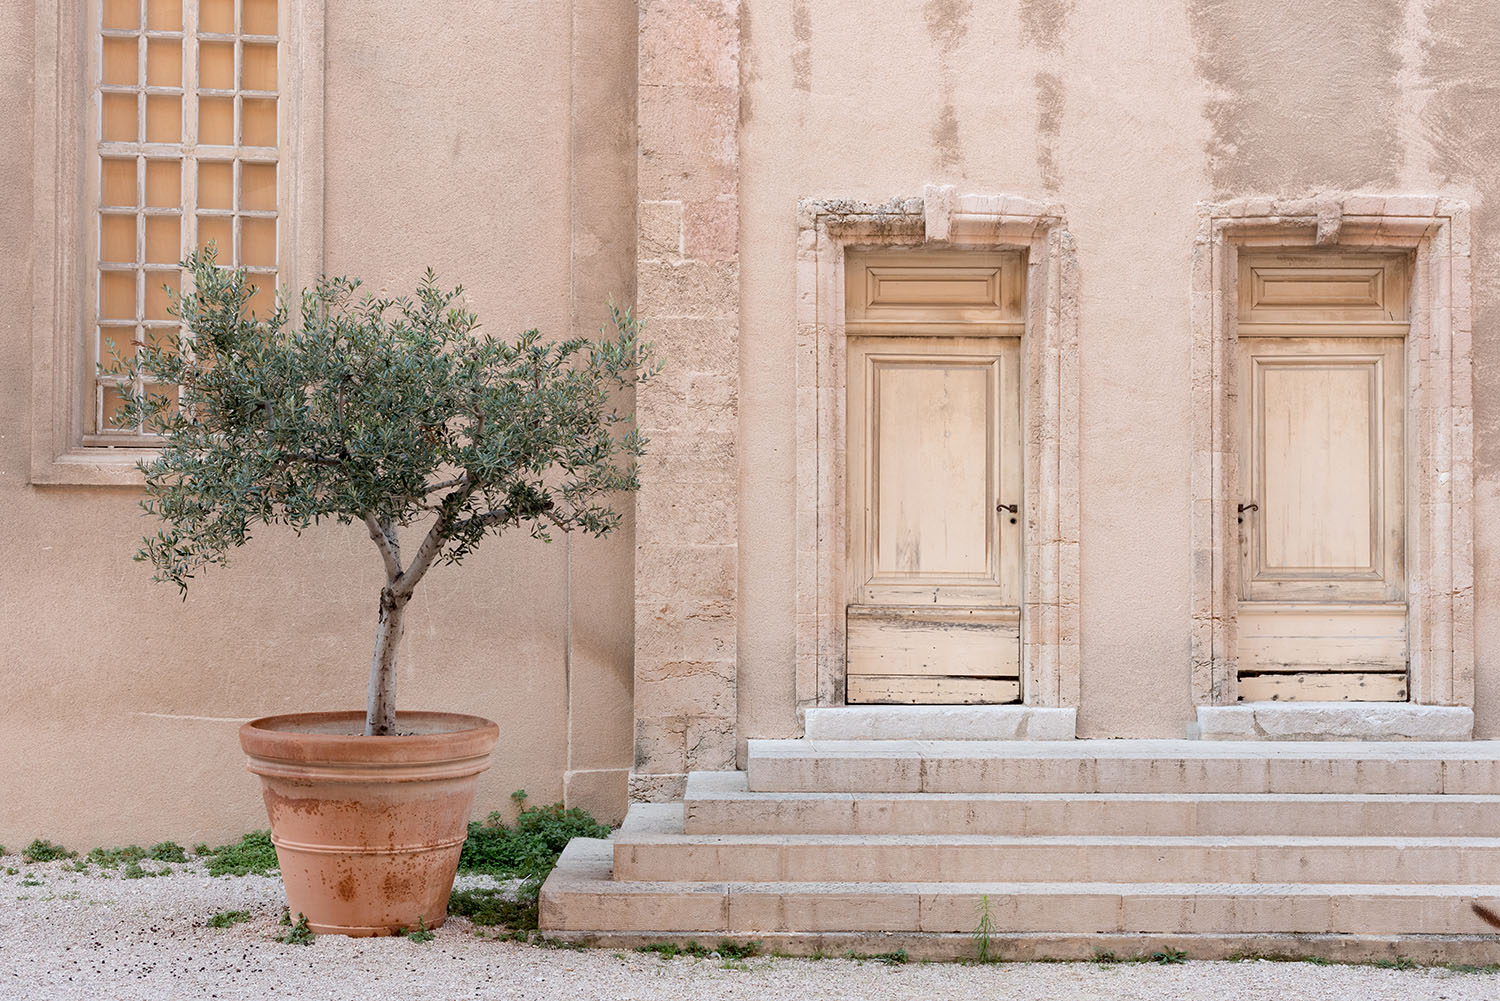 Coco & Vera - Olive tree and doors at La Vieille Charite in Marseille